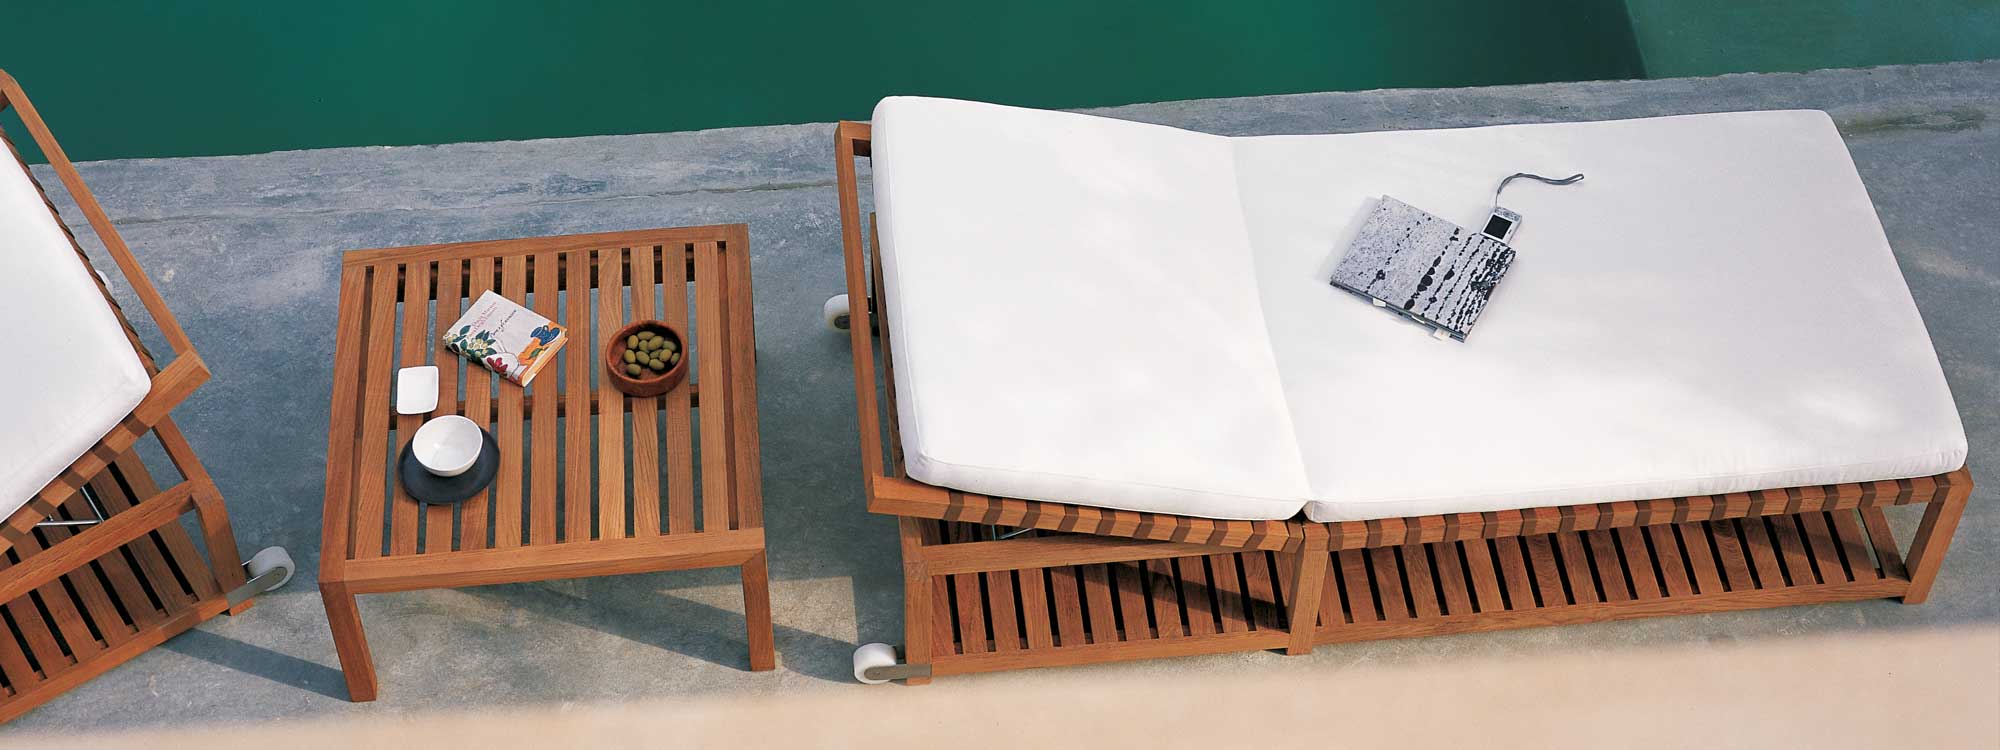 Image of pair of RODA Network minimalist teak loungers on poolside, with teak low table in between with bowl of olives and book on top